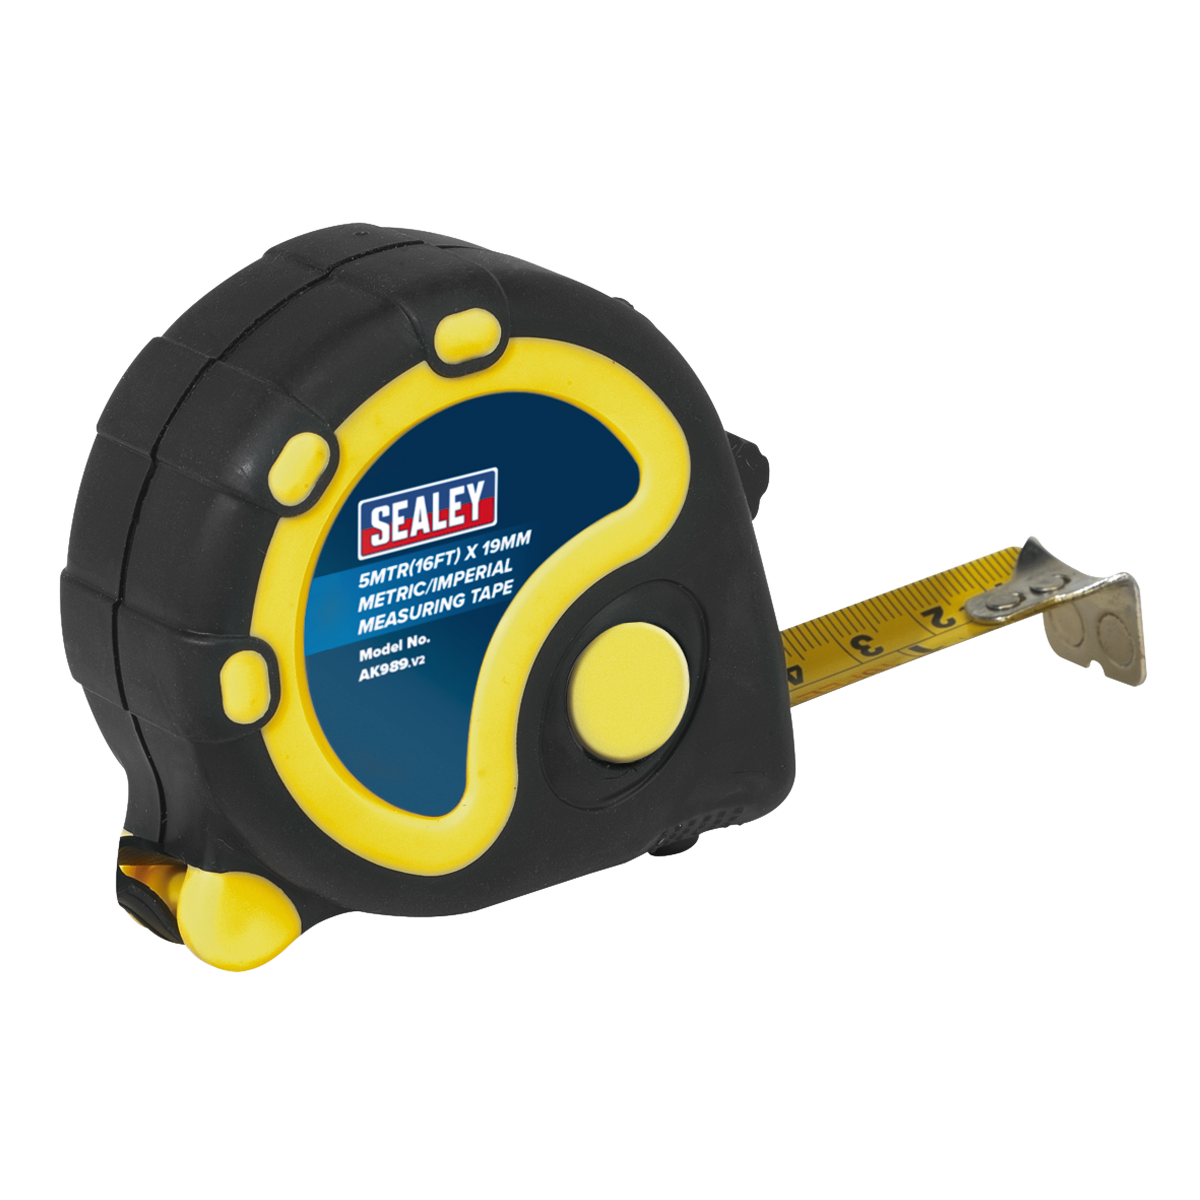 Rubber Tape Measure 5m(16ft) x 19mm - Metric/Imperial